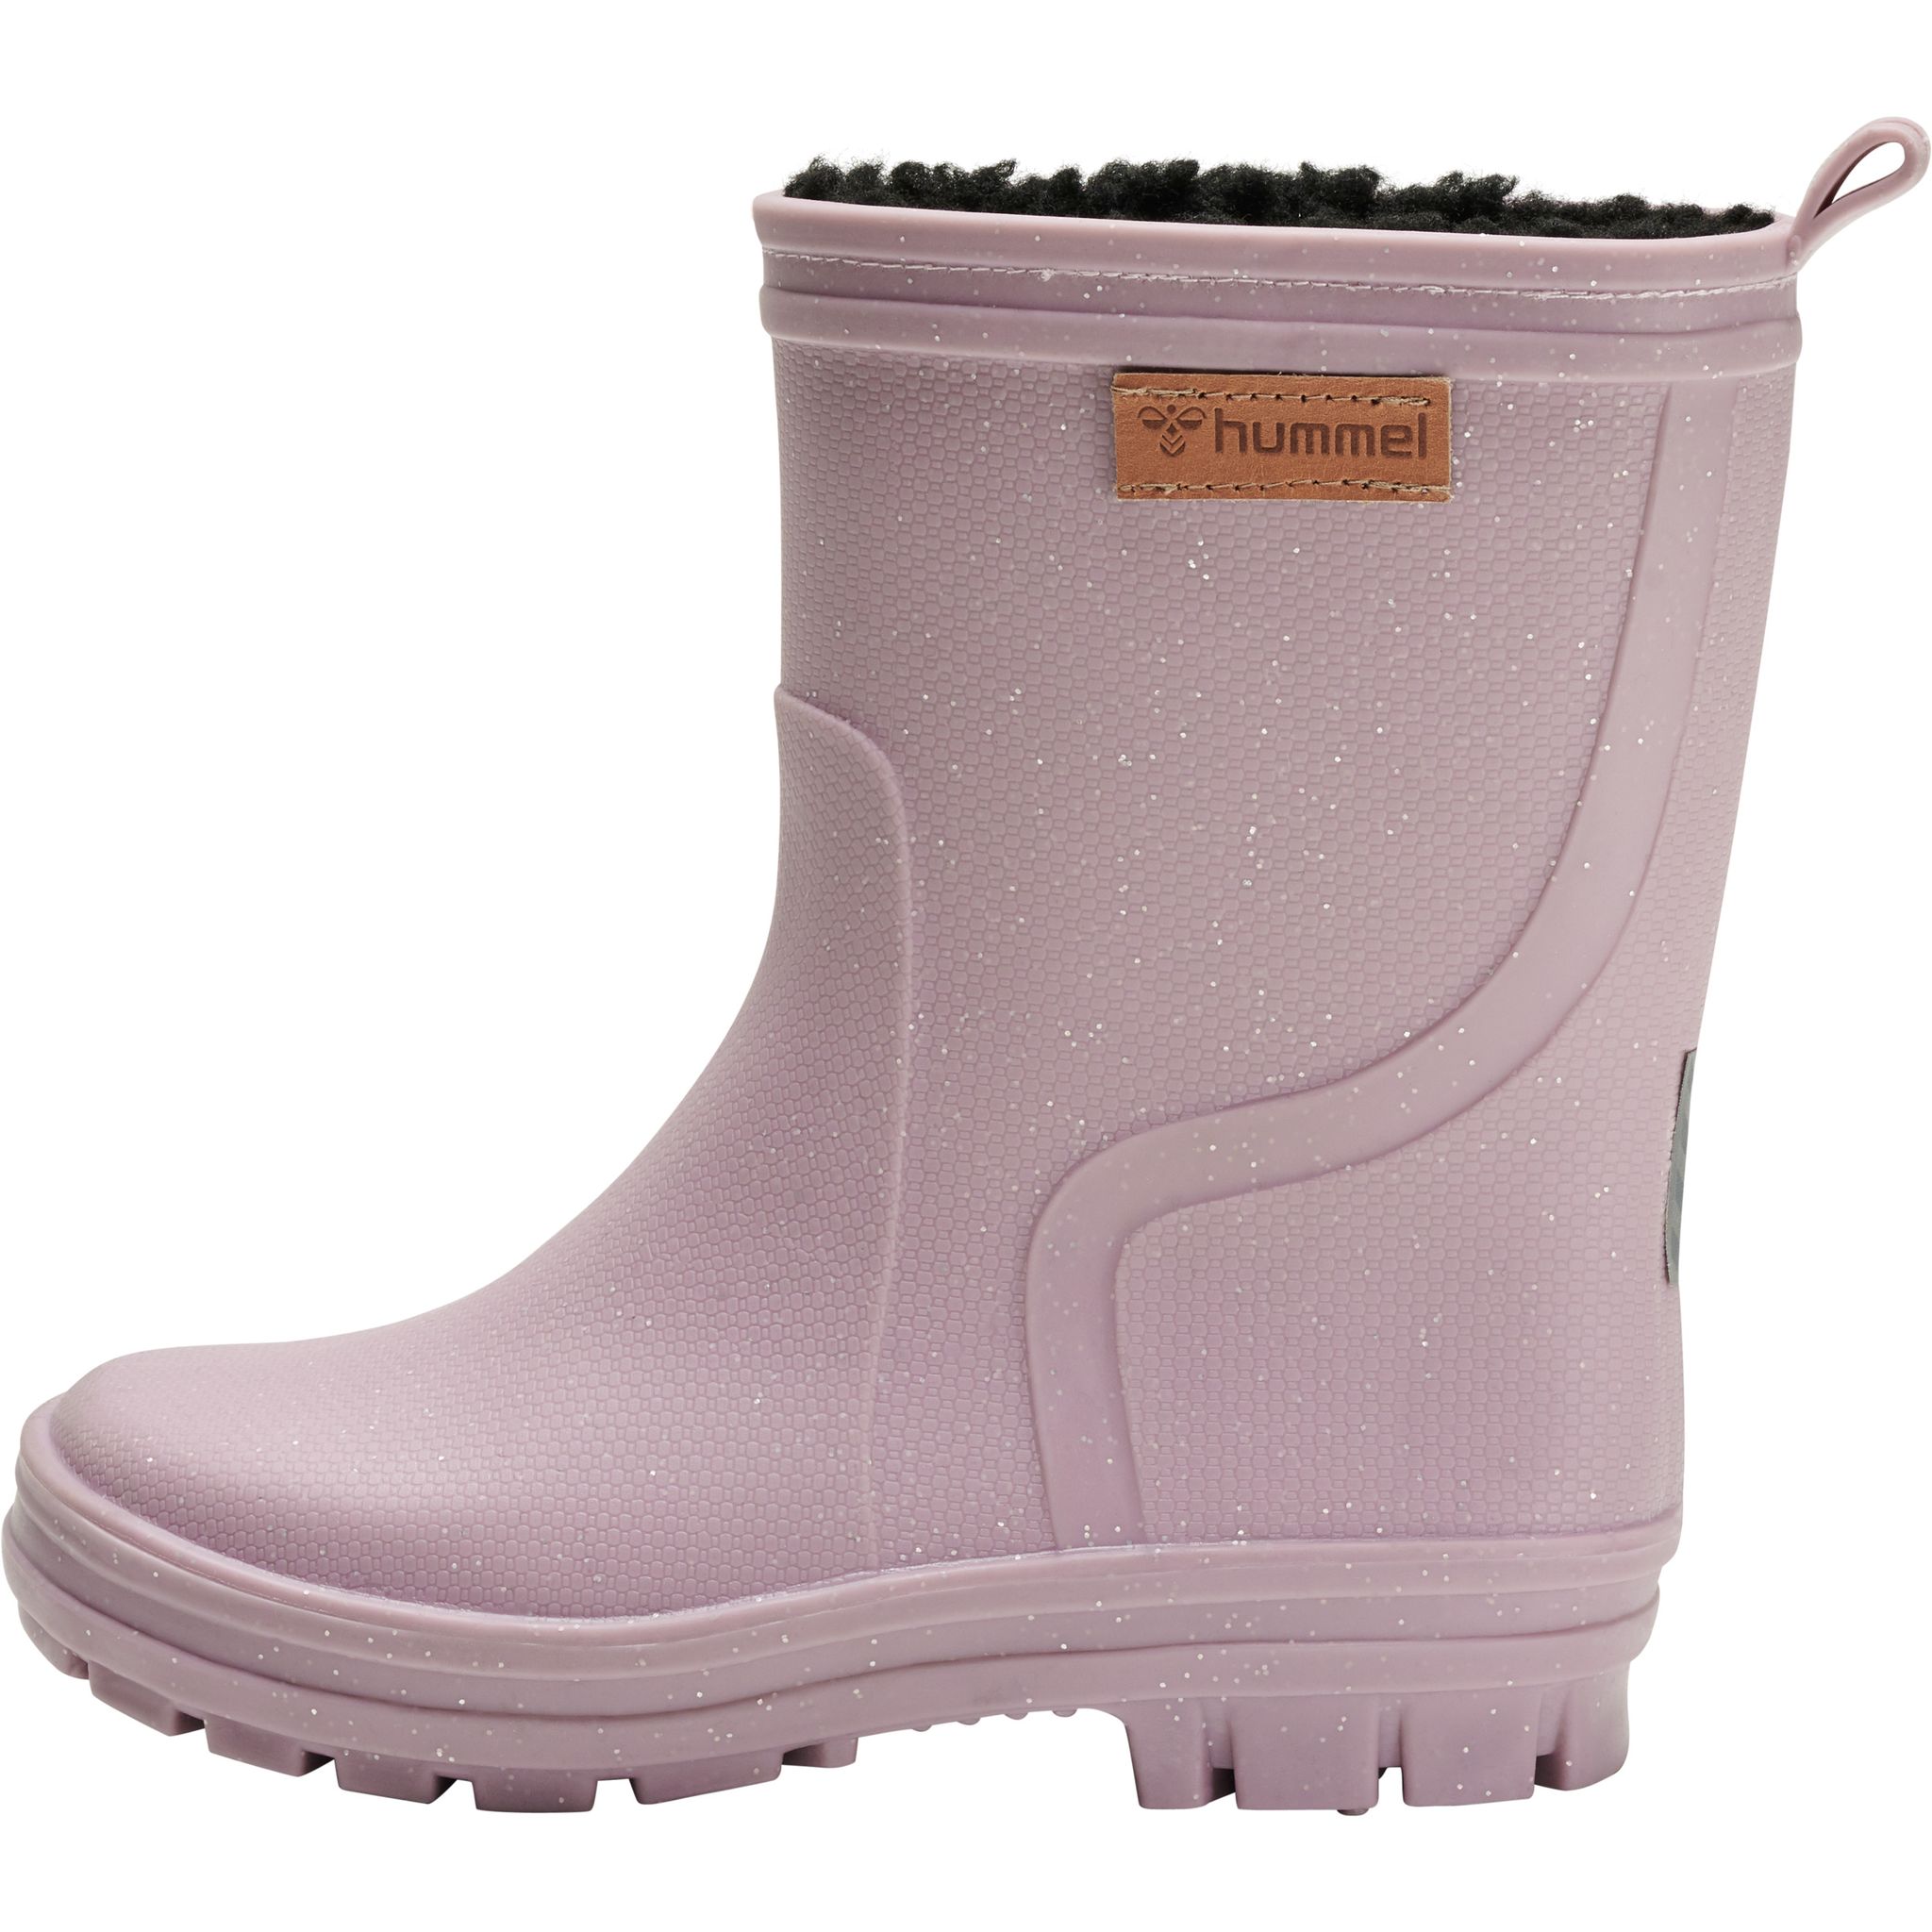 THERMO BOOT JR